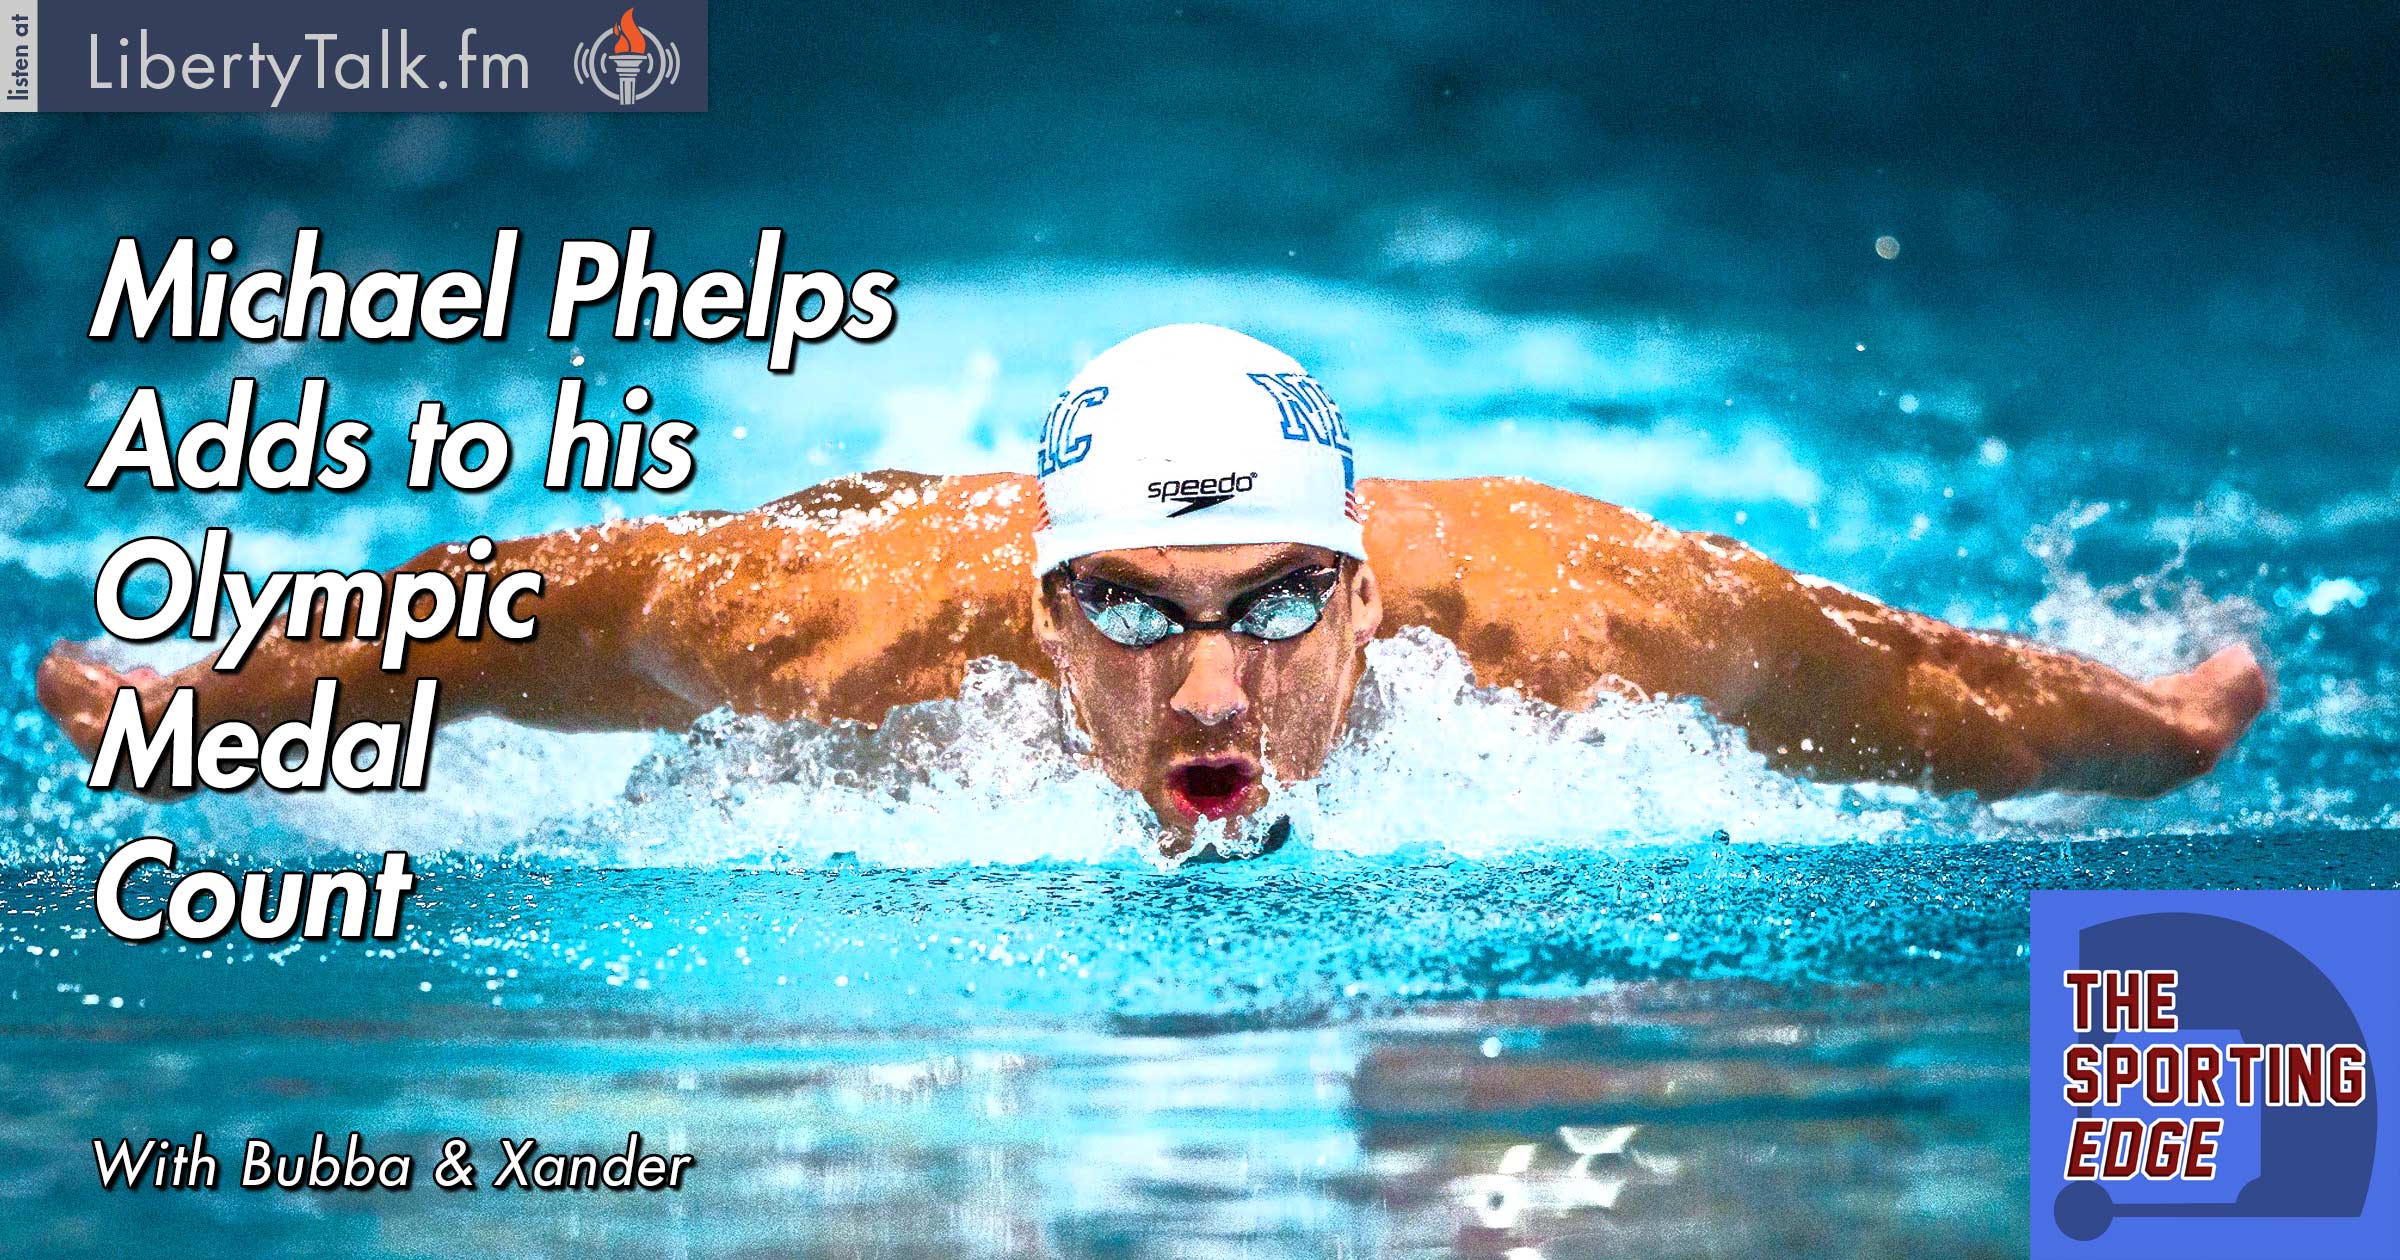 Michael Phelps Adds to his Olympic Medal Count - The Sporting Edge